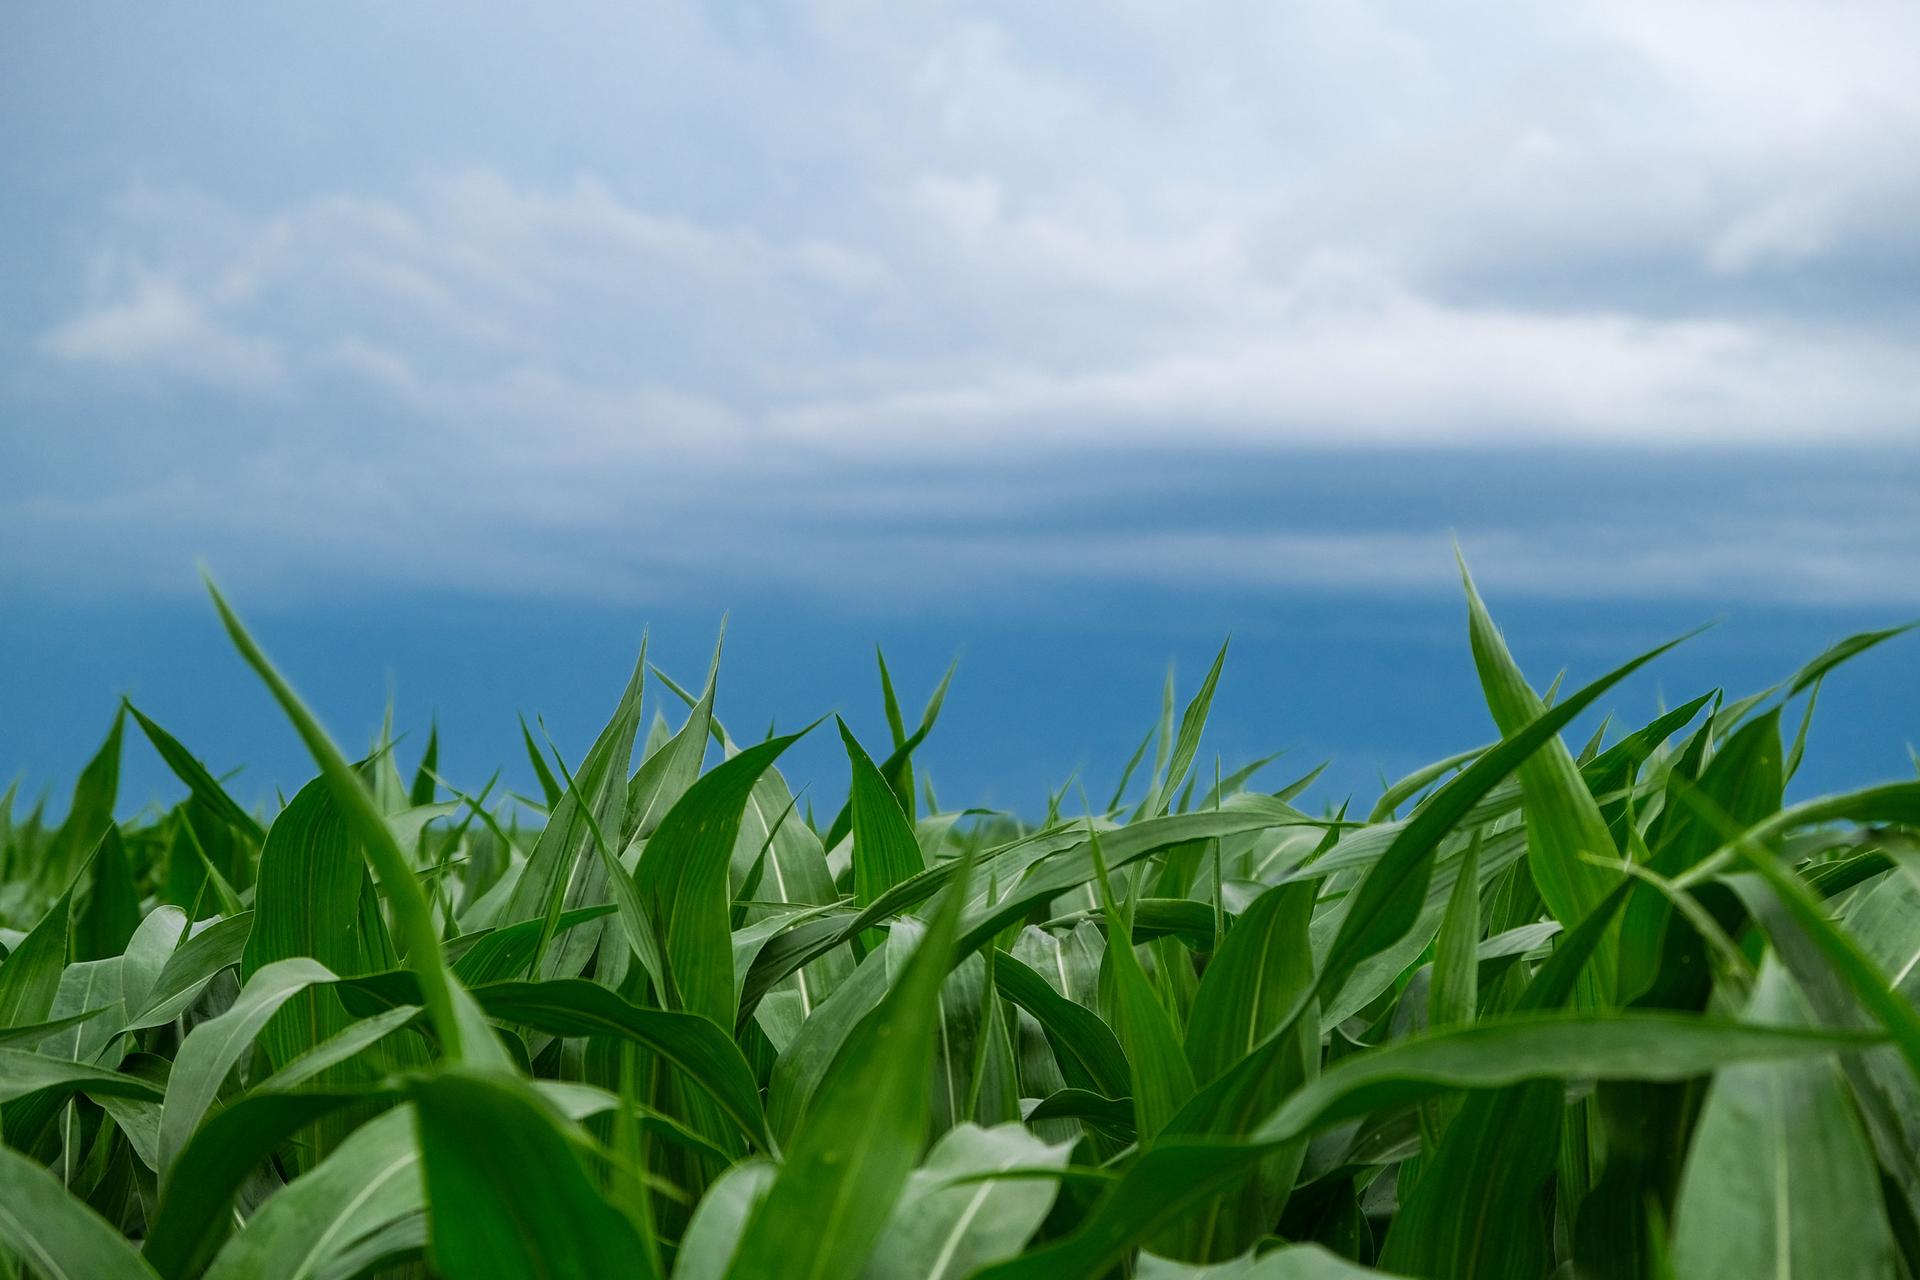 A field of young green corn with a blue sky in the background.